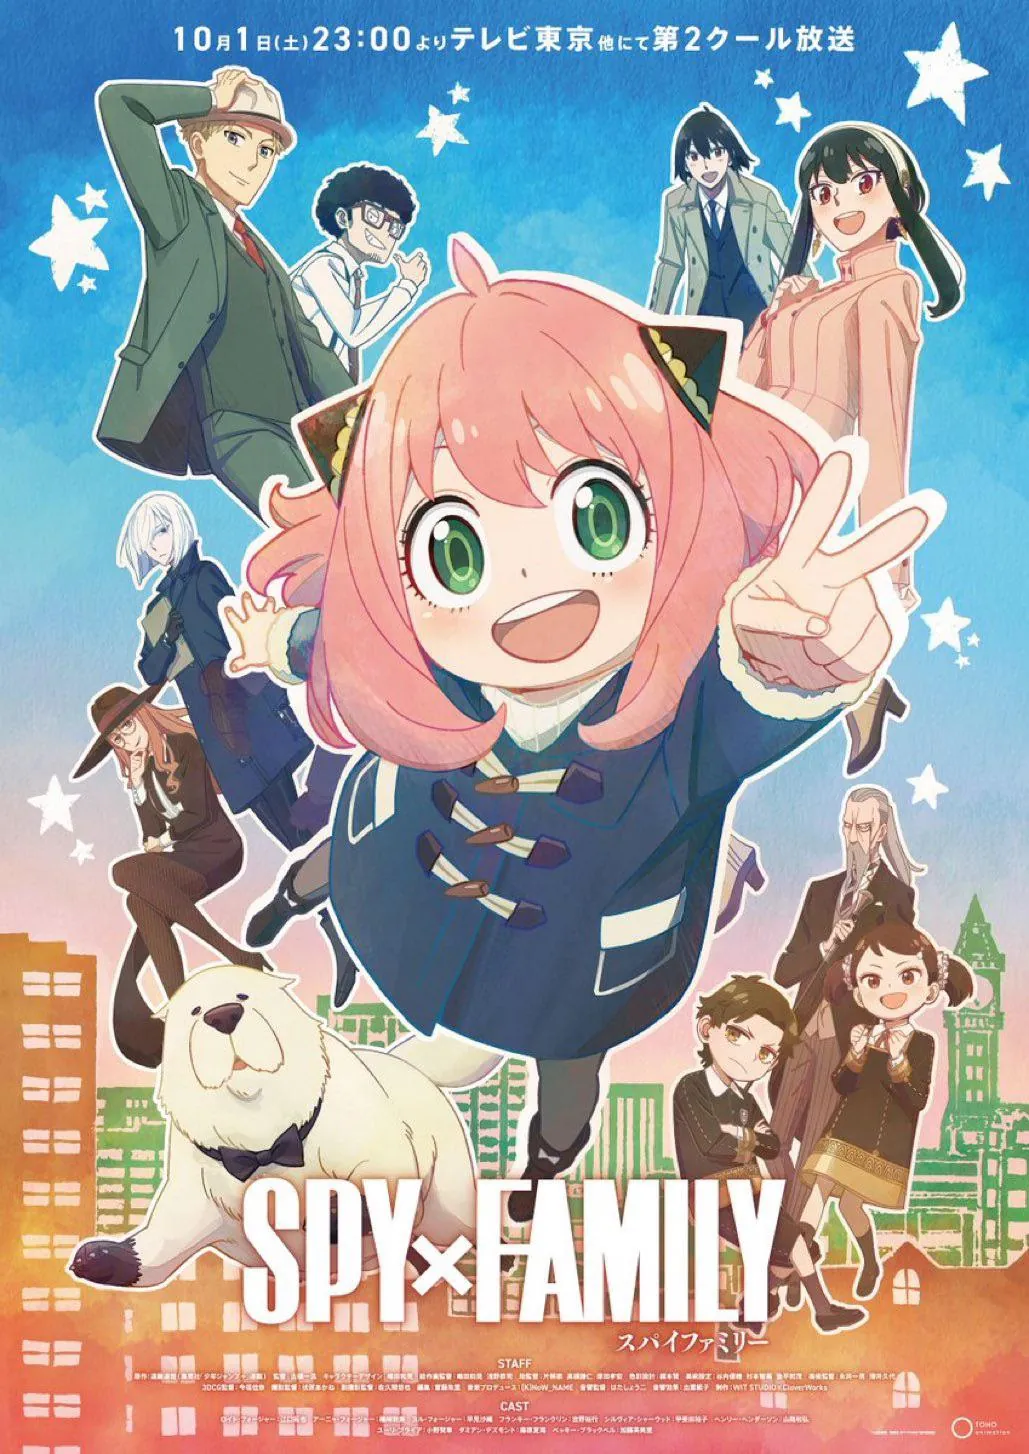 Original anime based on Spy x family coming in January 2023 thoughts    rSpyxFamily